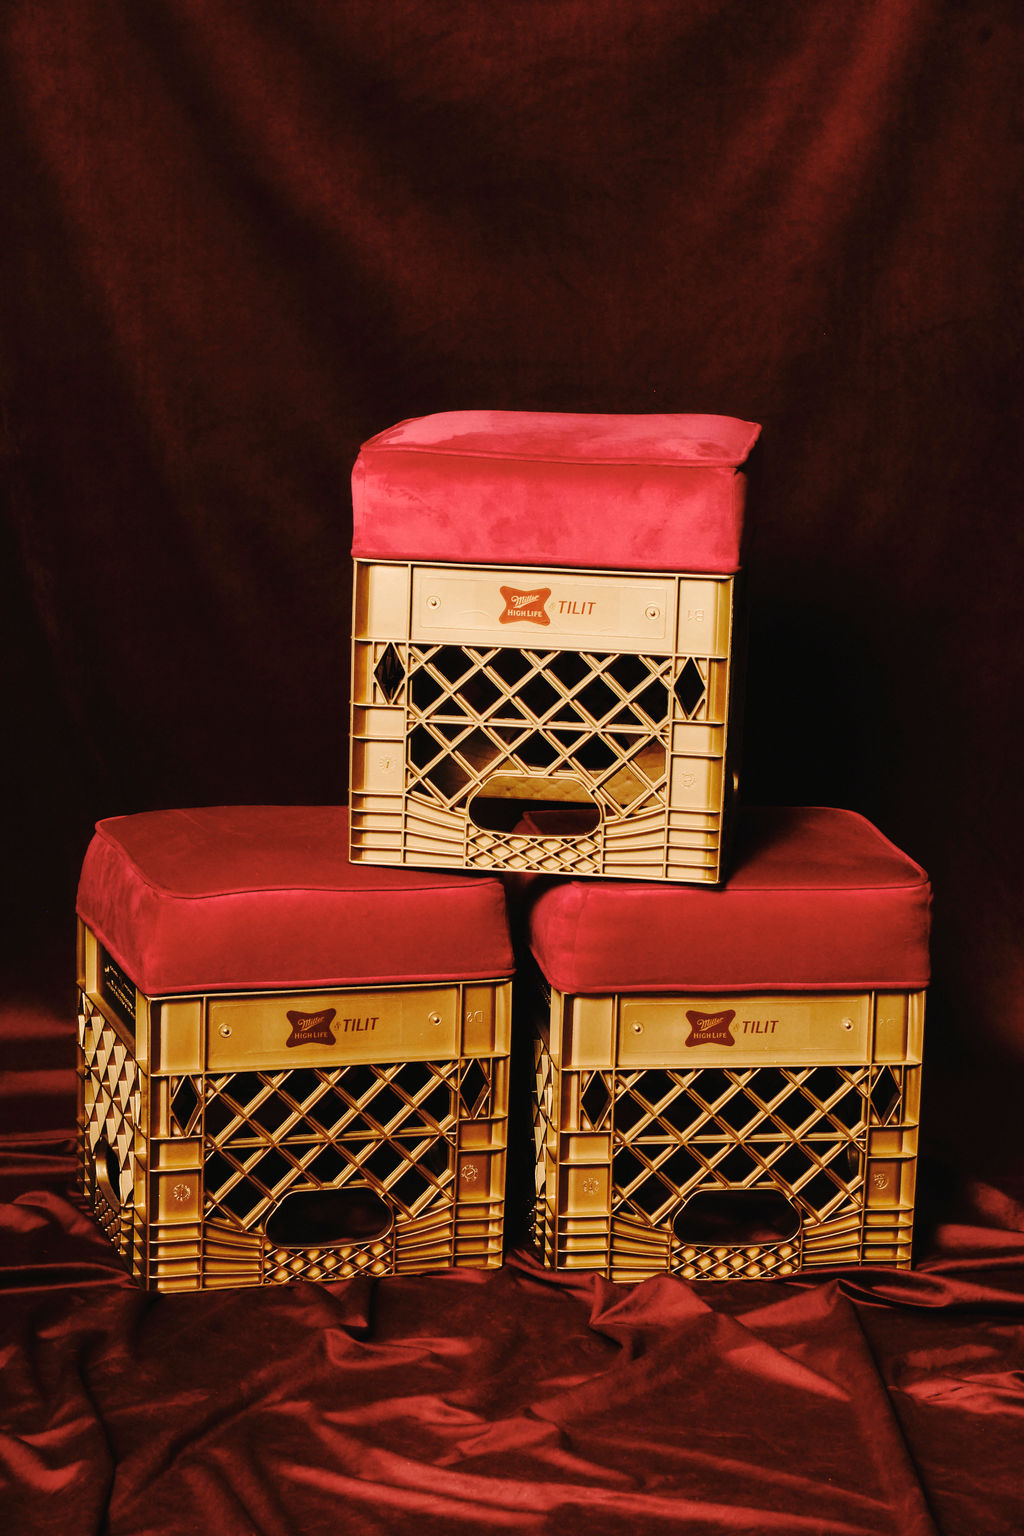 TILIT x Miller High Life Crate Throne